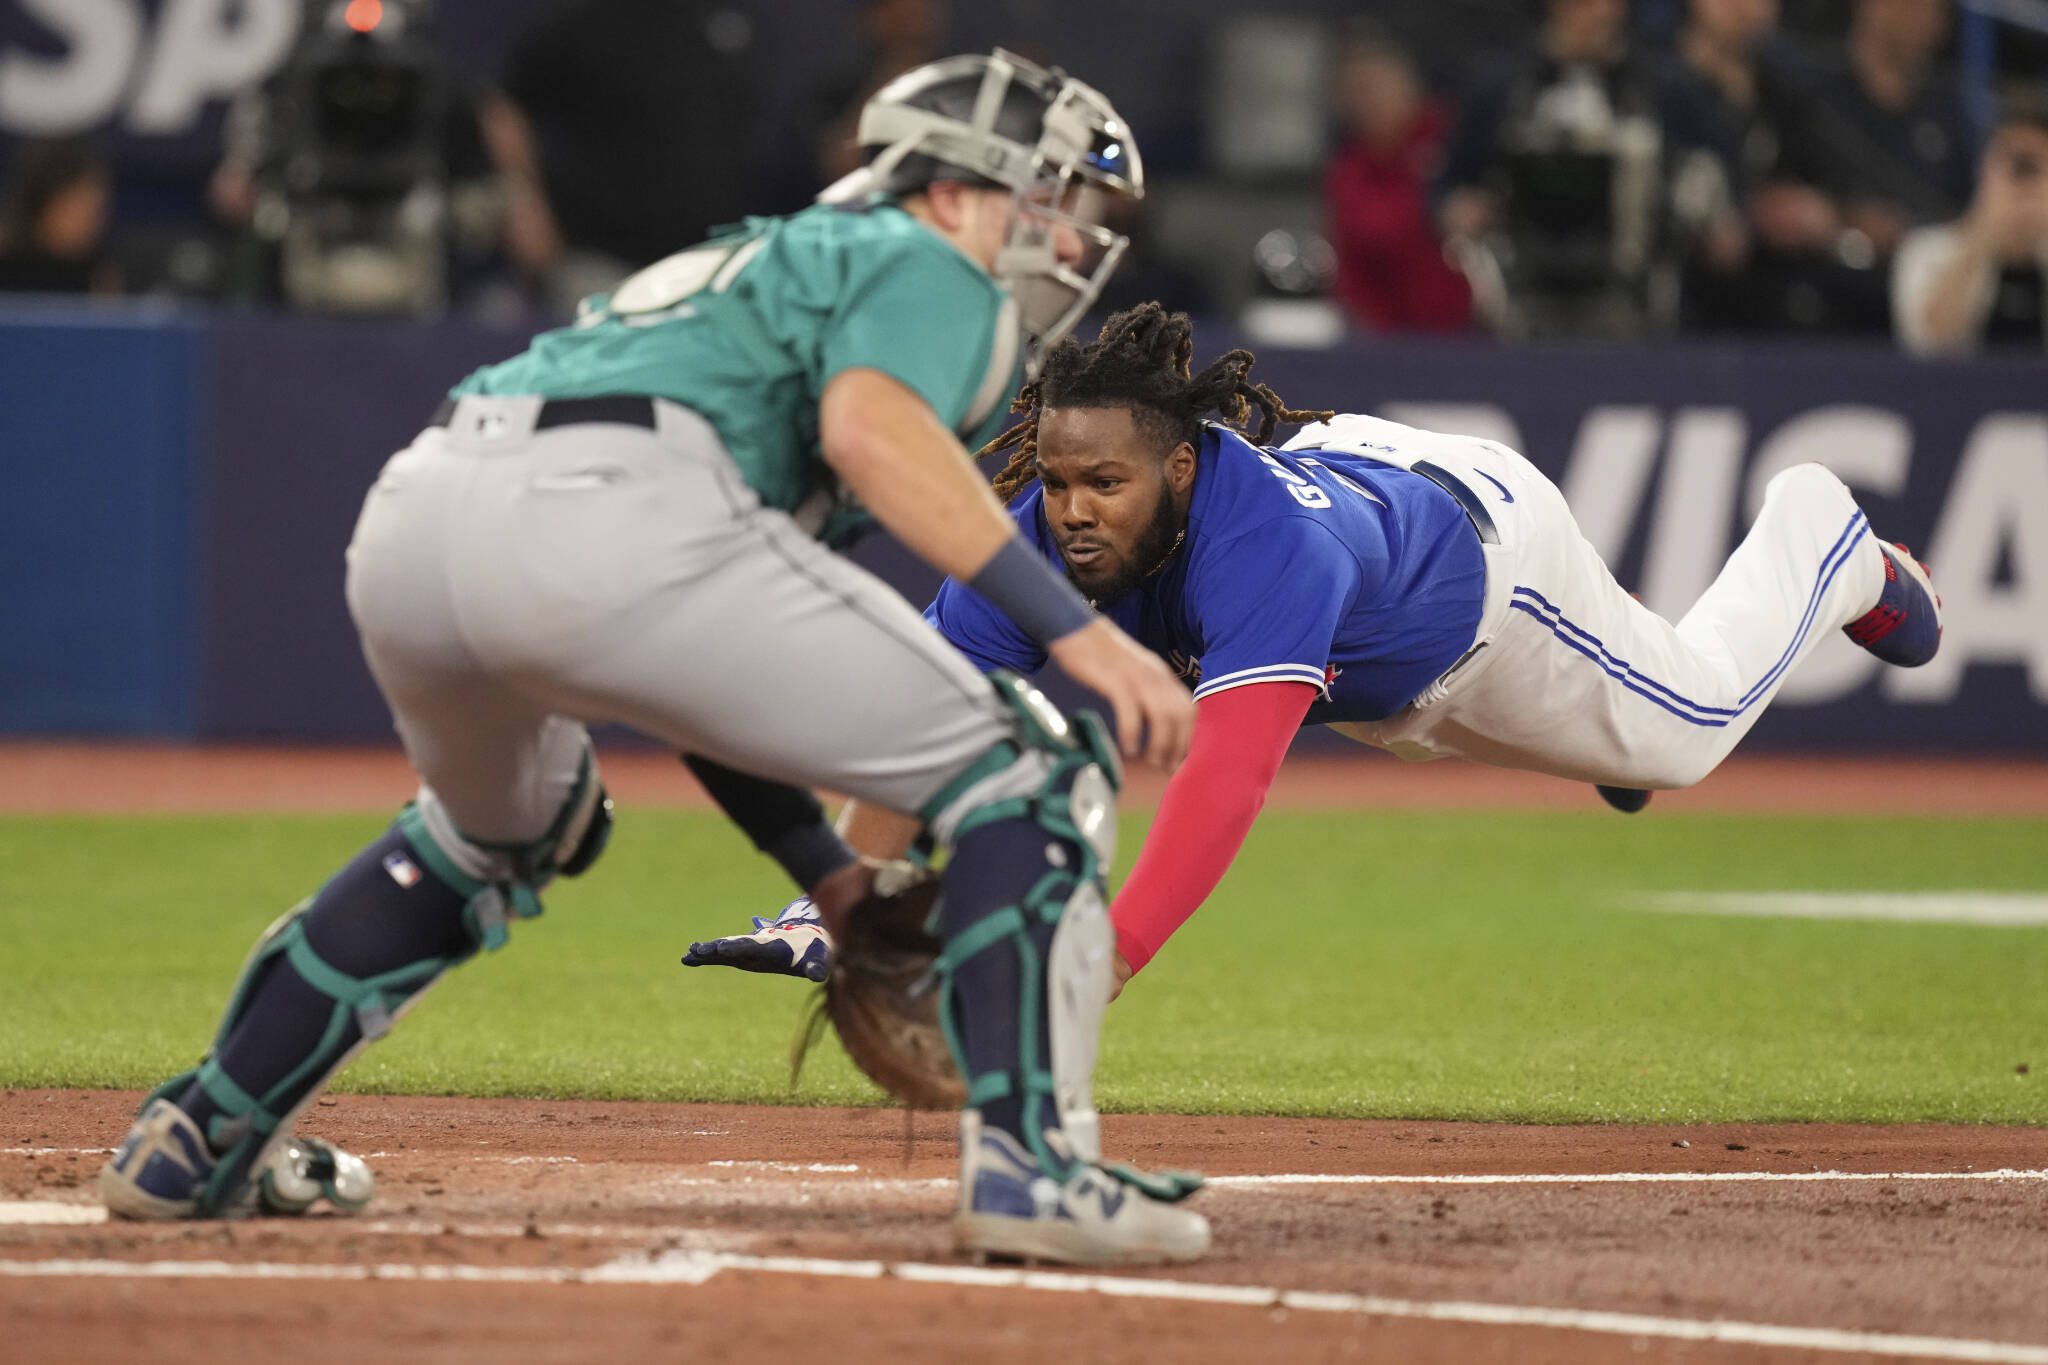 The Blue Jays’ Vladimir Guerrero Jr. dives home to score as Mariners catcher Cal Raleigh waits for the throw after a hit by Matt Chapman during the third inning of a game Friday in Toronto. (Chris Young/The Canadian Press via AP)